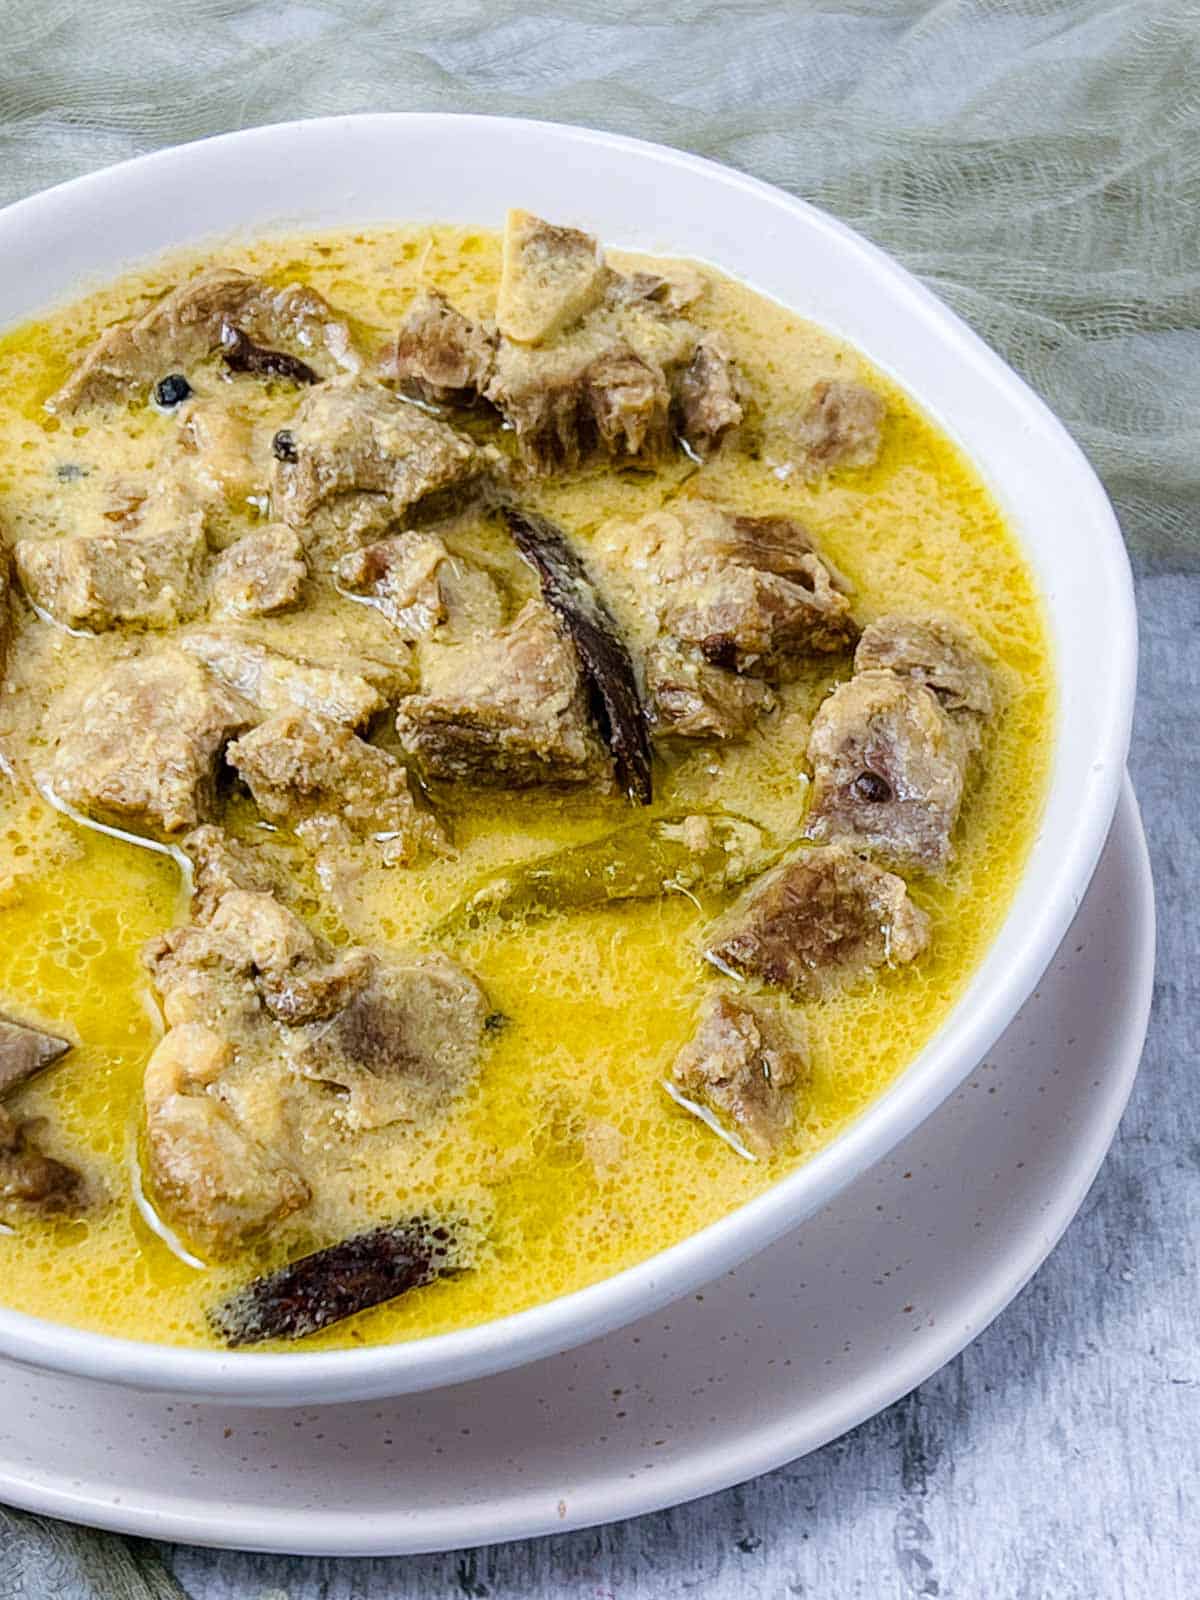 Lamb rezala in a white bowl placed on white surface.